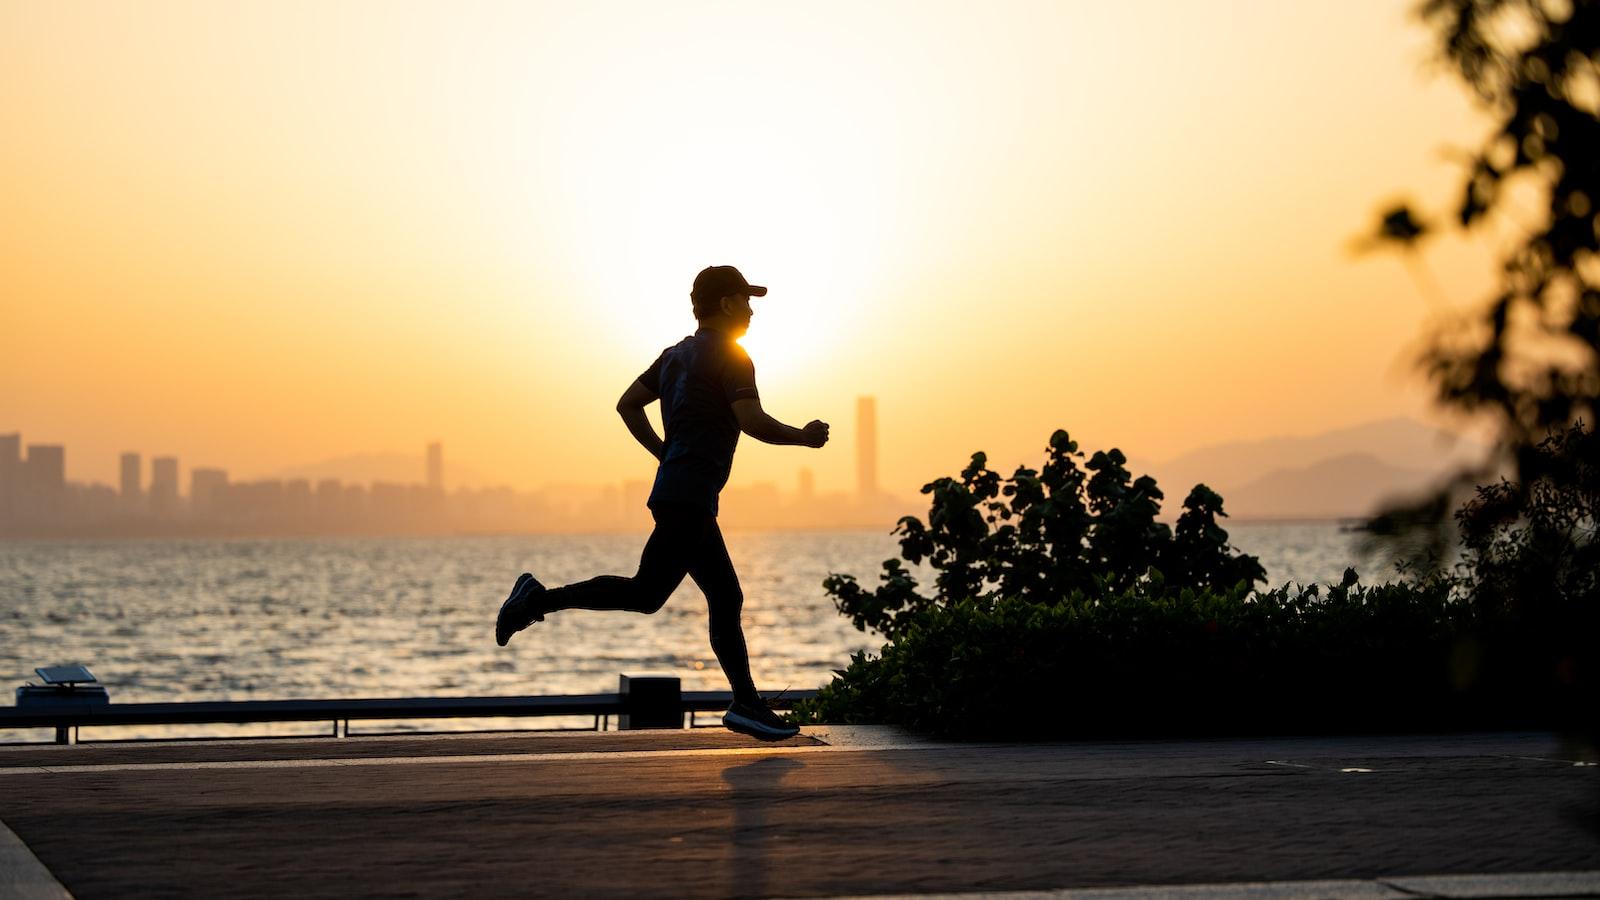 Soundtracks to Boost Your Stride: Discover Inspiring Beats to Power Your Run with Musical Magic!